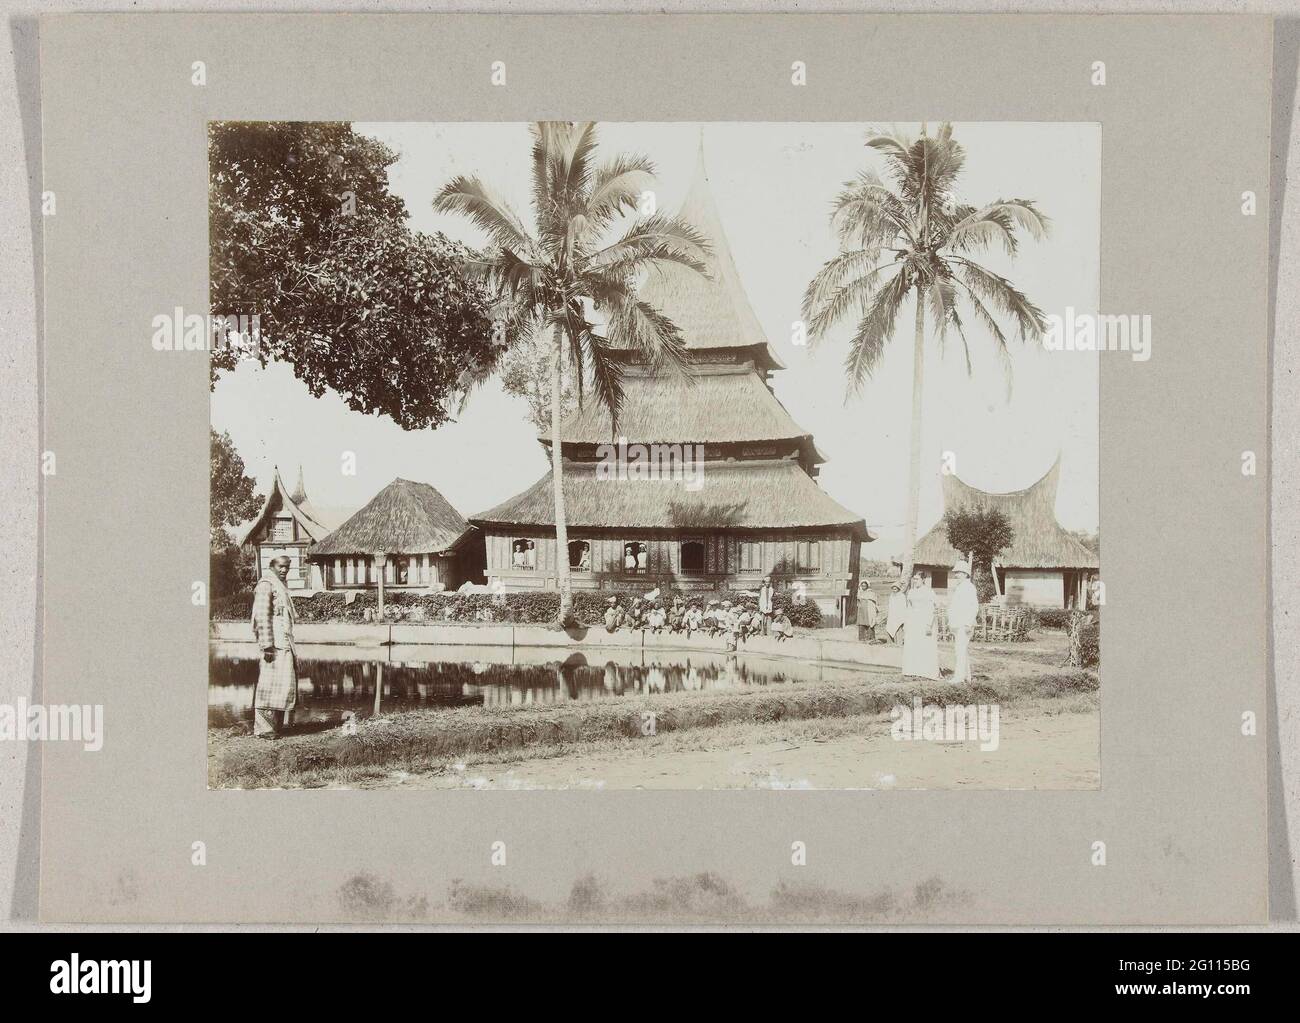 Mosque with fish pond in Kampong Talank at Fort de Kock; 6. Visch pond Fort De Kock. Mosque with fish pond in Kampong Taluk at Fort de Kock, Sumatra, Dutch East Indies. On the right a western couple, children at the edge of the pond. Stock Photo